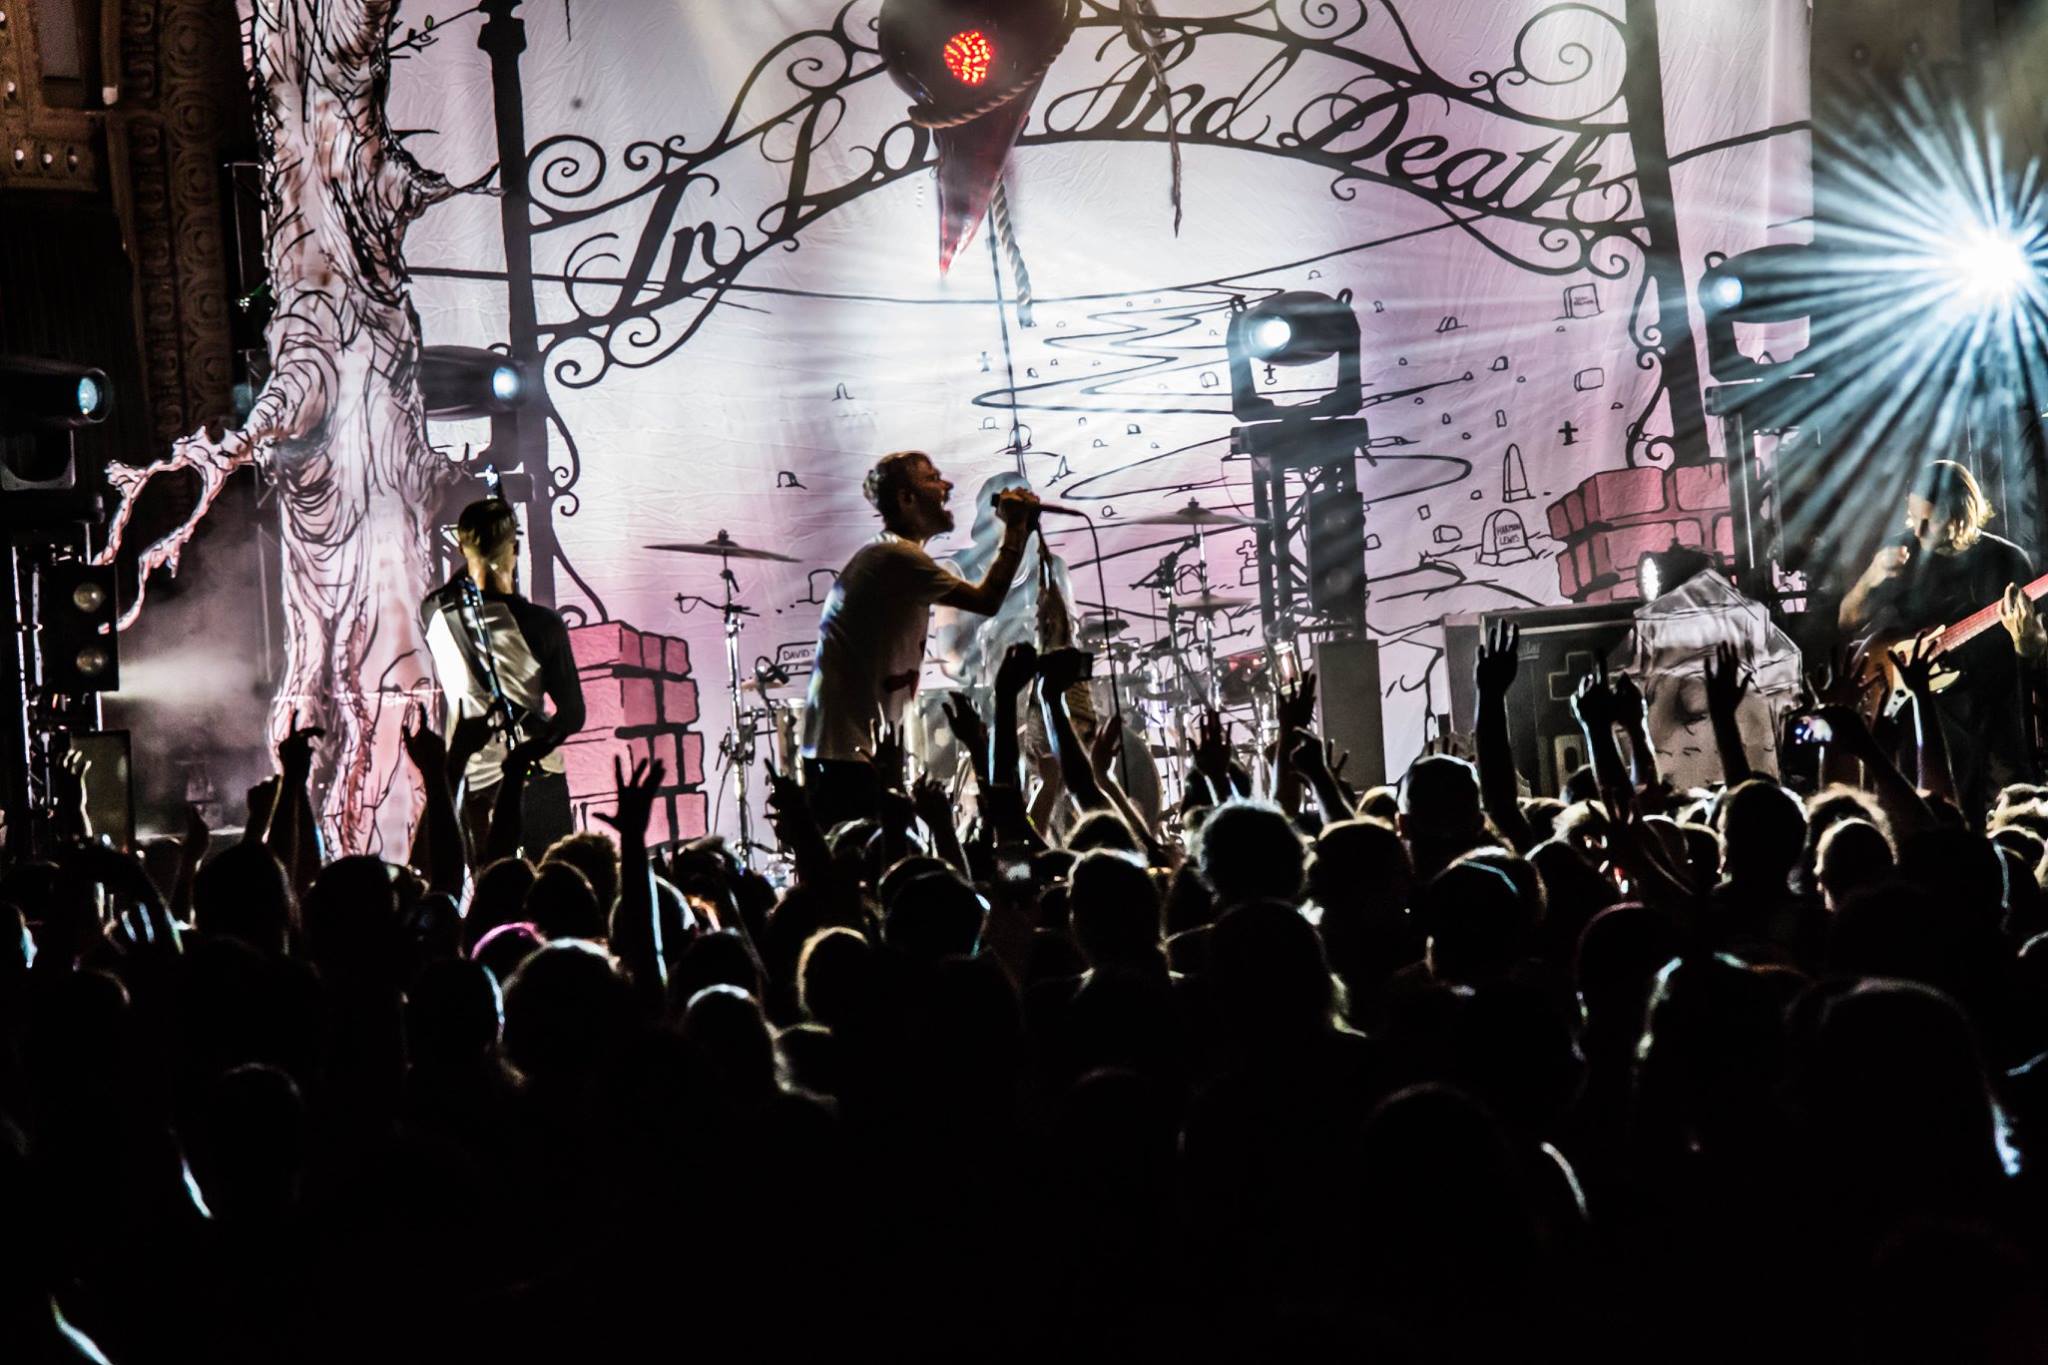 The Used at the Crystal Ballroom in Portland. Credit: Bright Music Photography 